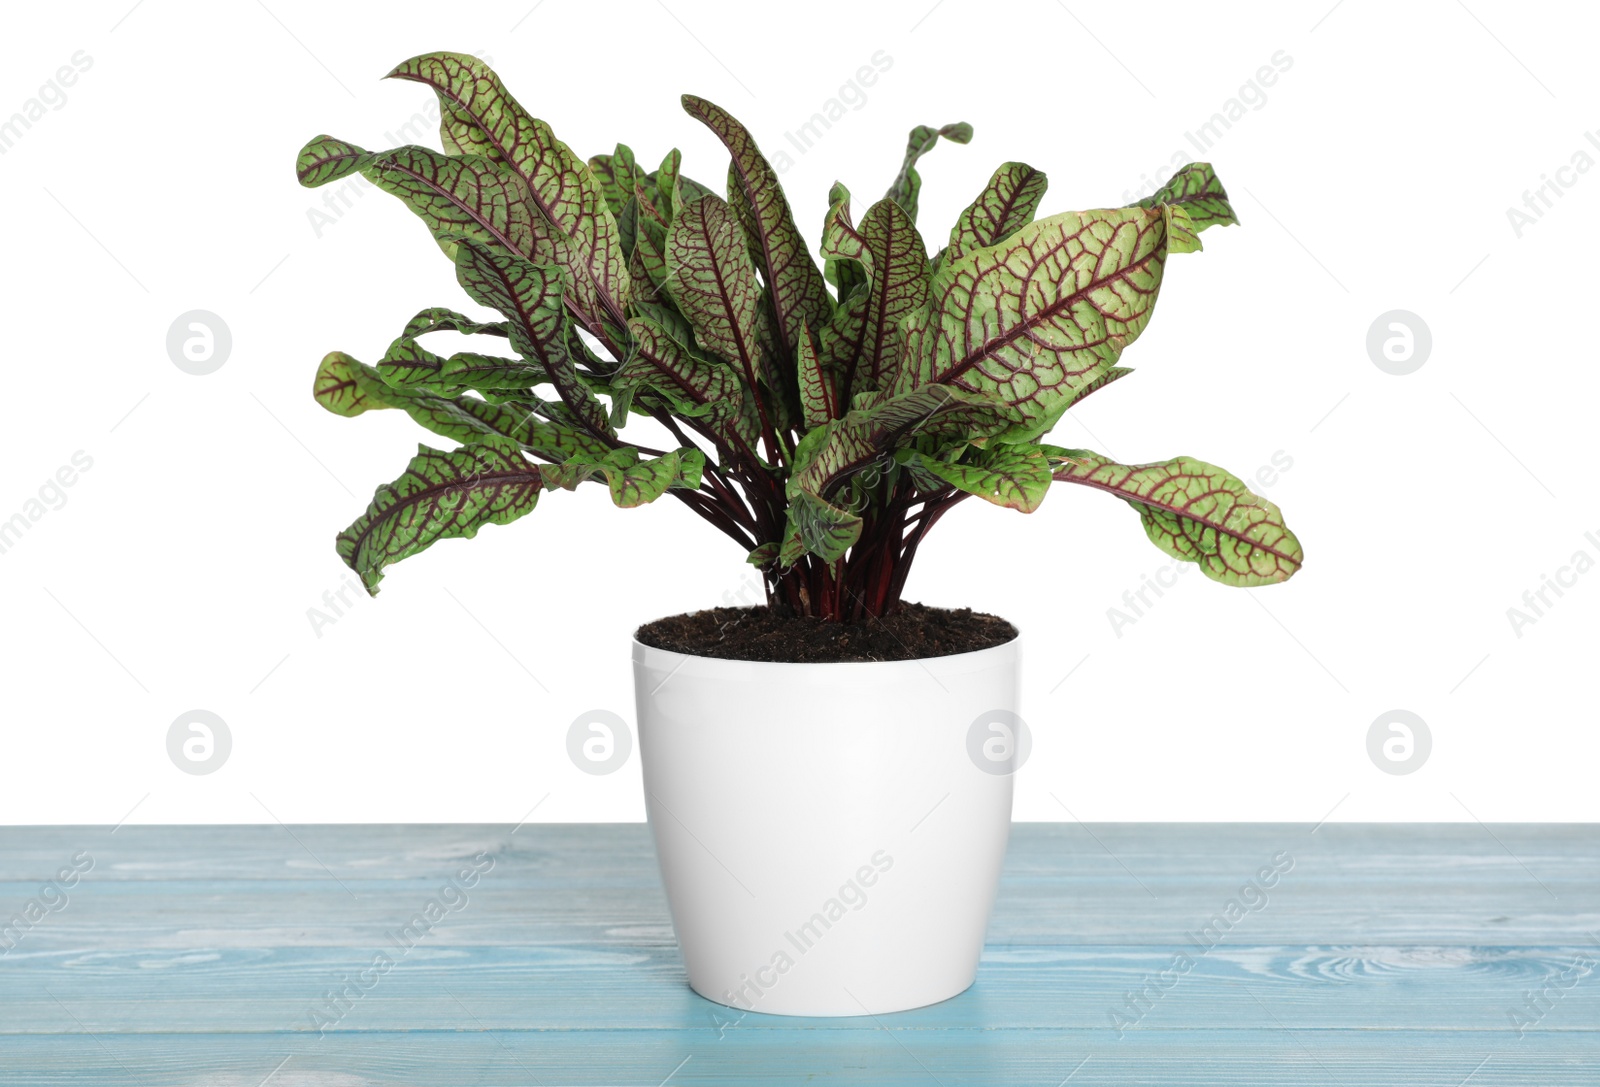 Photo of Sorrel plant in pot on blue wooden table against white background